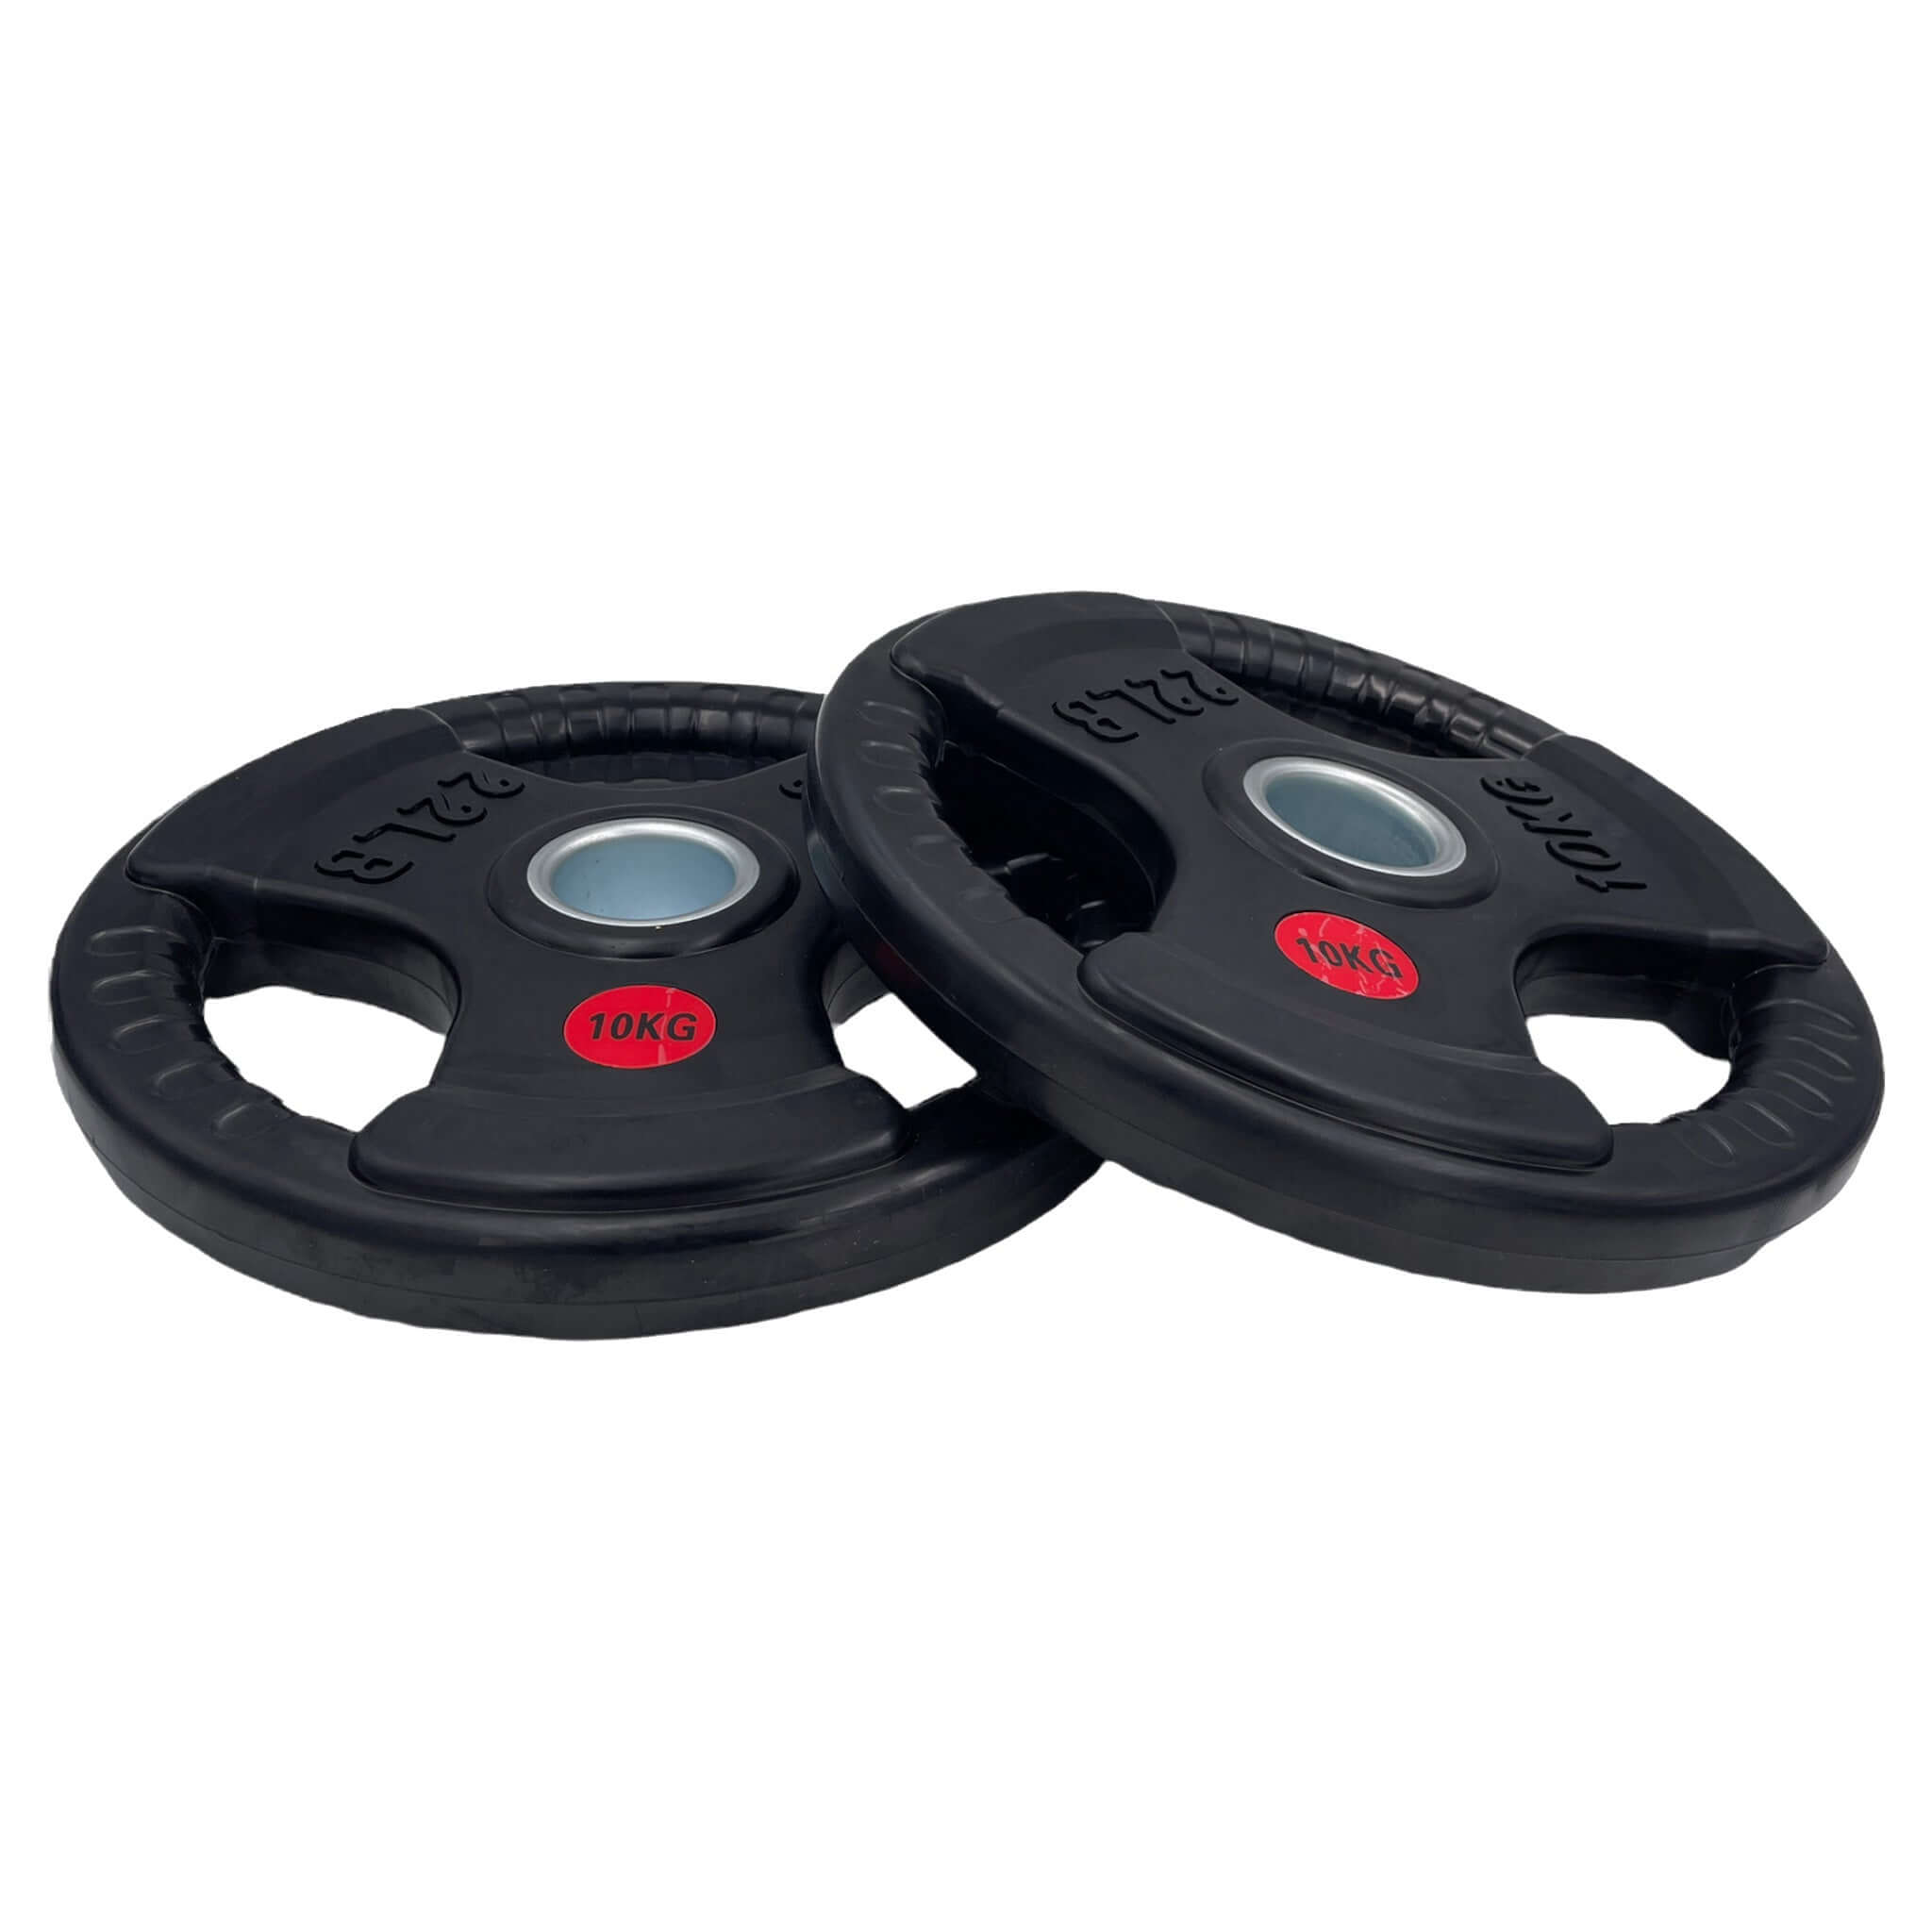 Rubber Coated Type-O Tri-Grip Weight Plates 150kg Bundle | Tri Grip Rubber Plates | INSOURCE